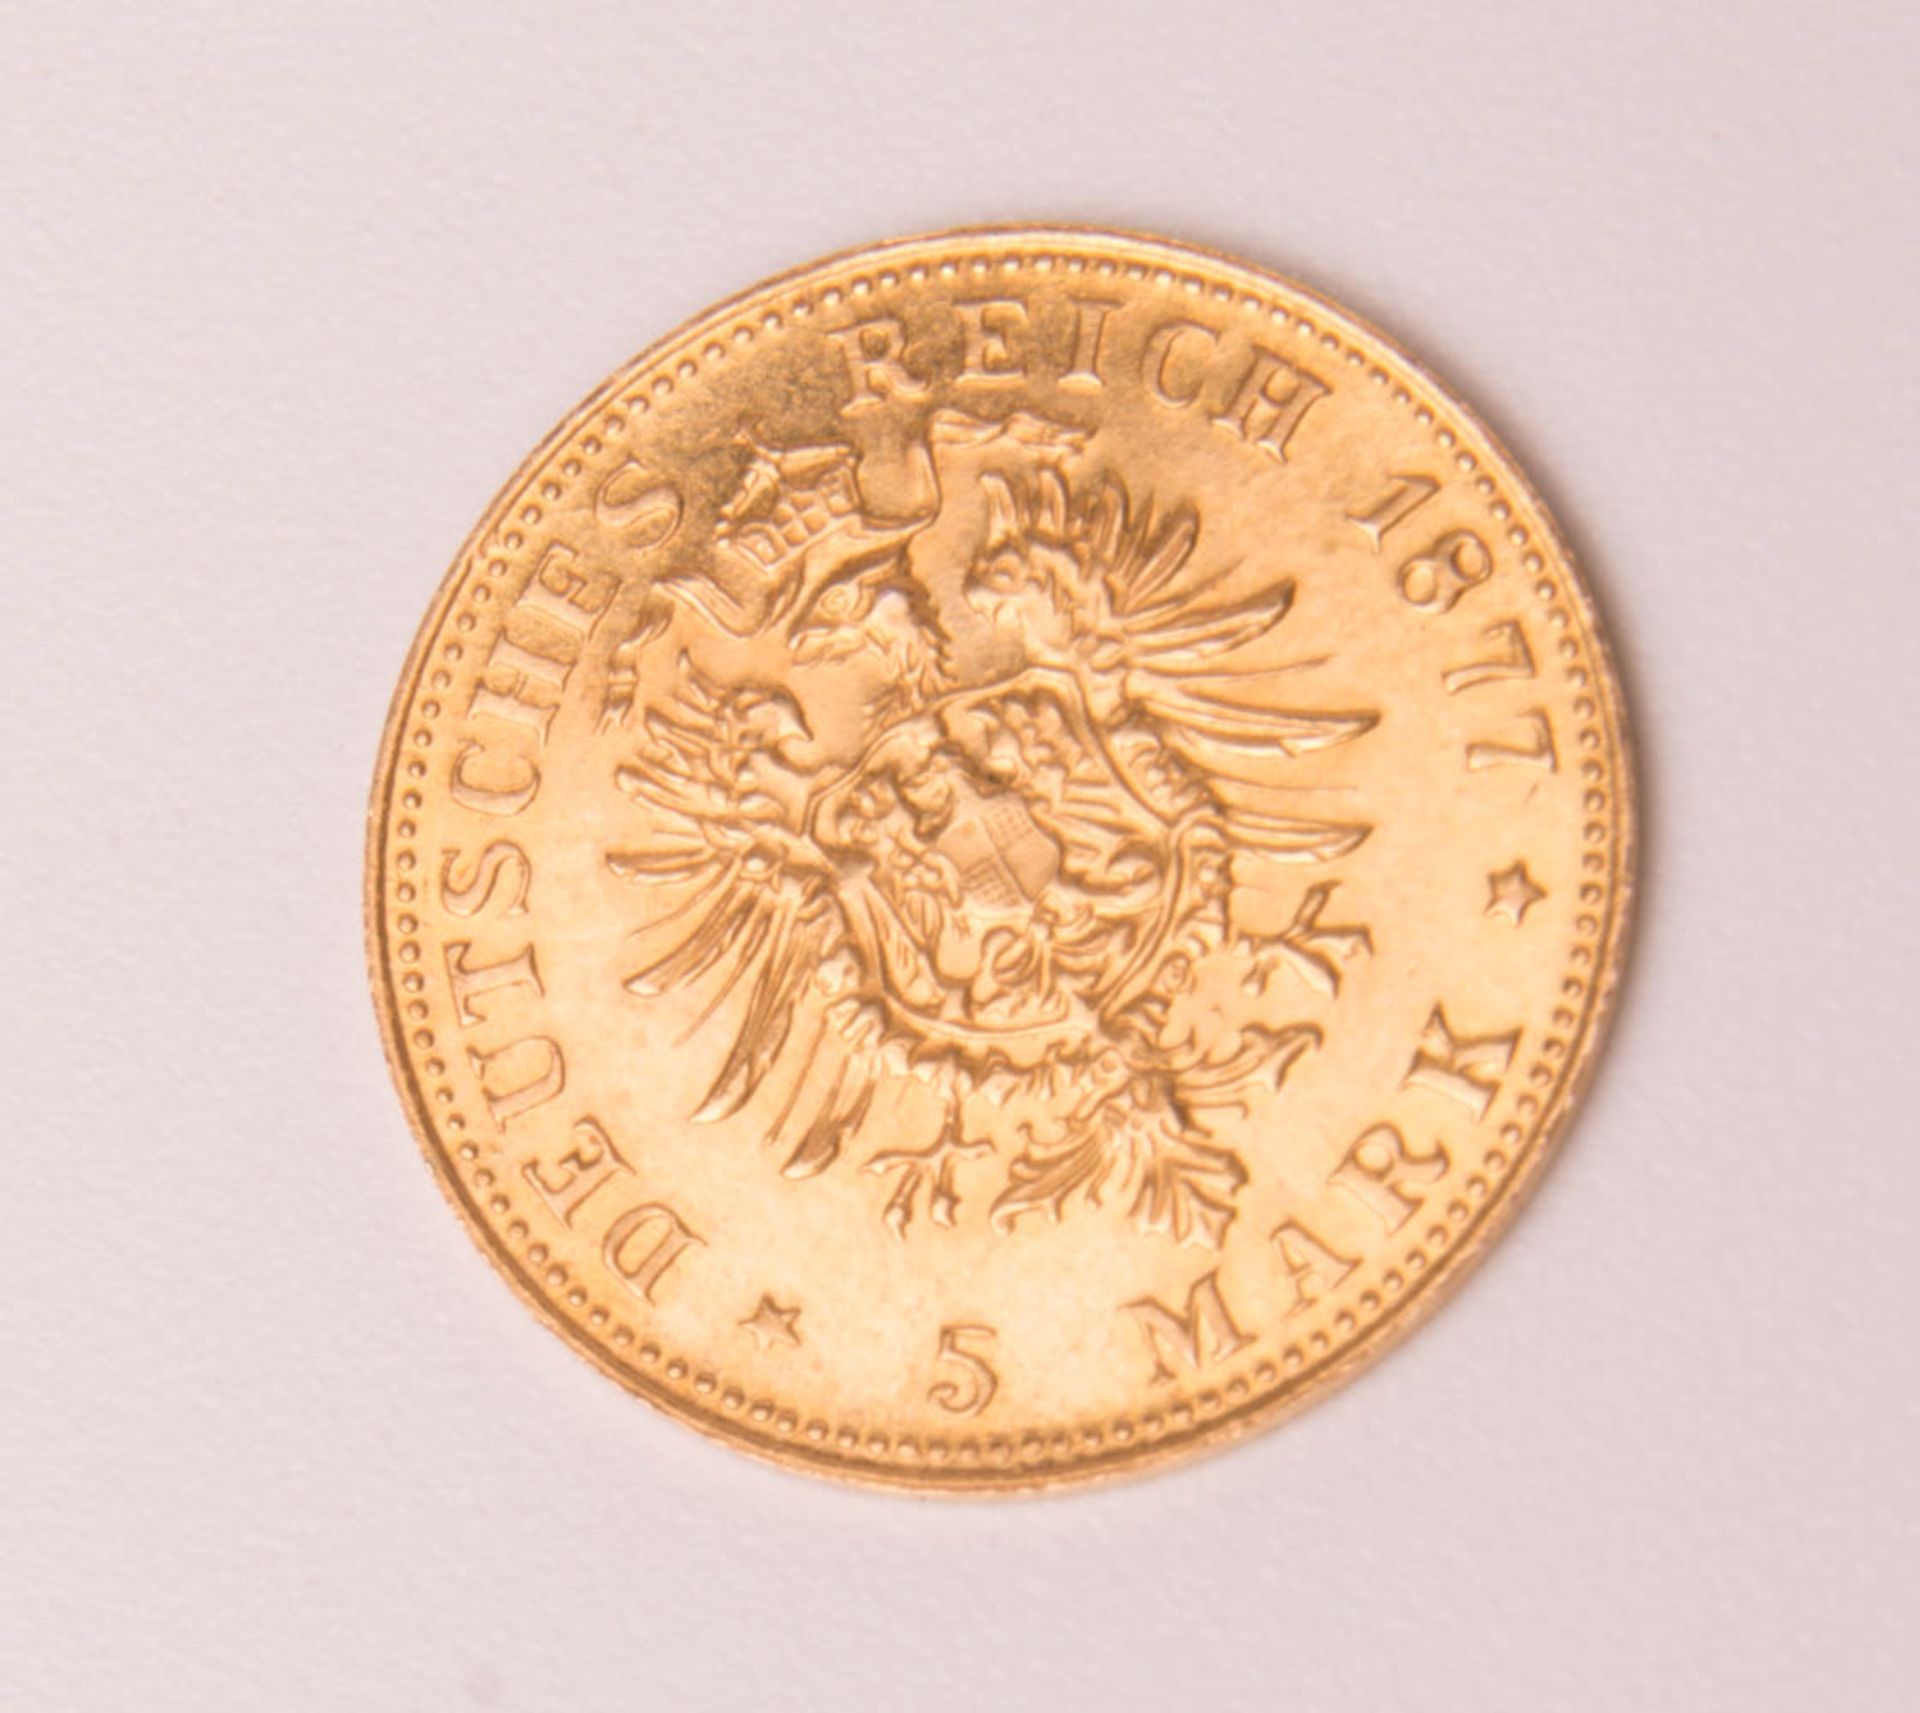 Gold coin 5 Mark, Prussia, 1877, restrike. - Image 2 of 2